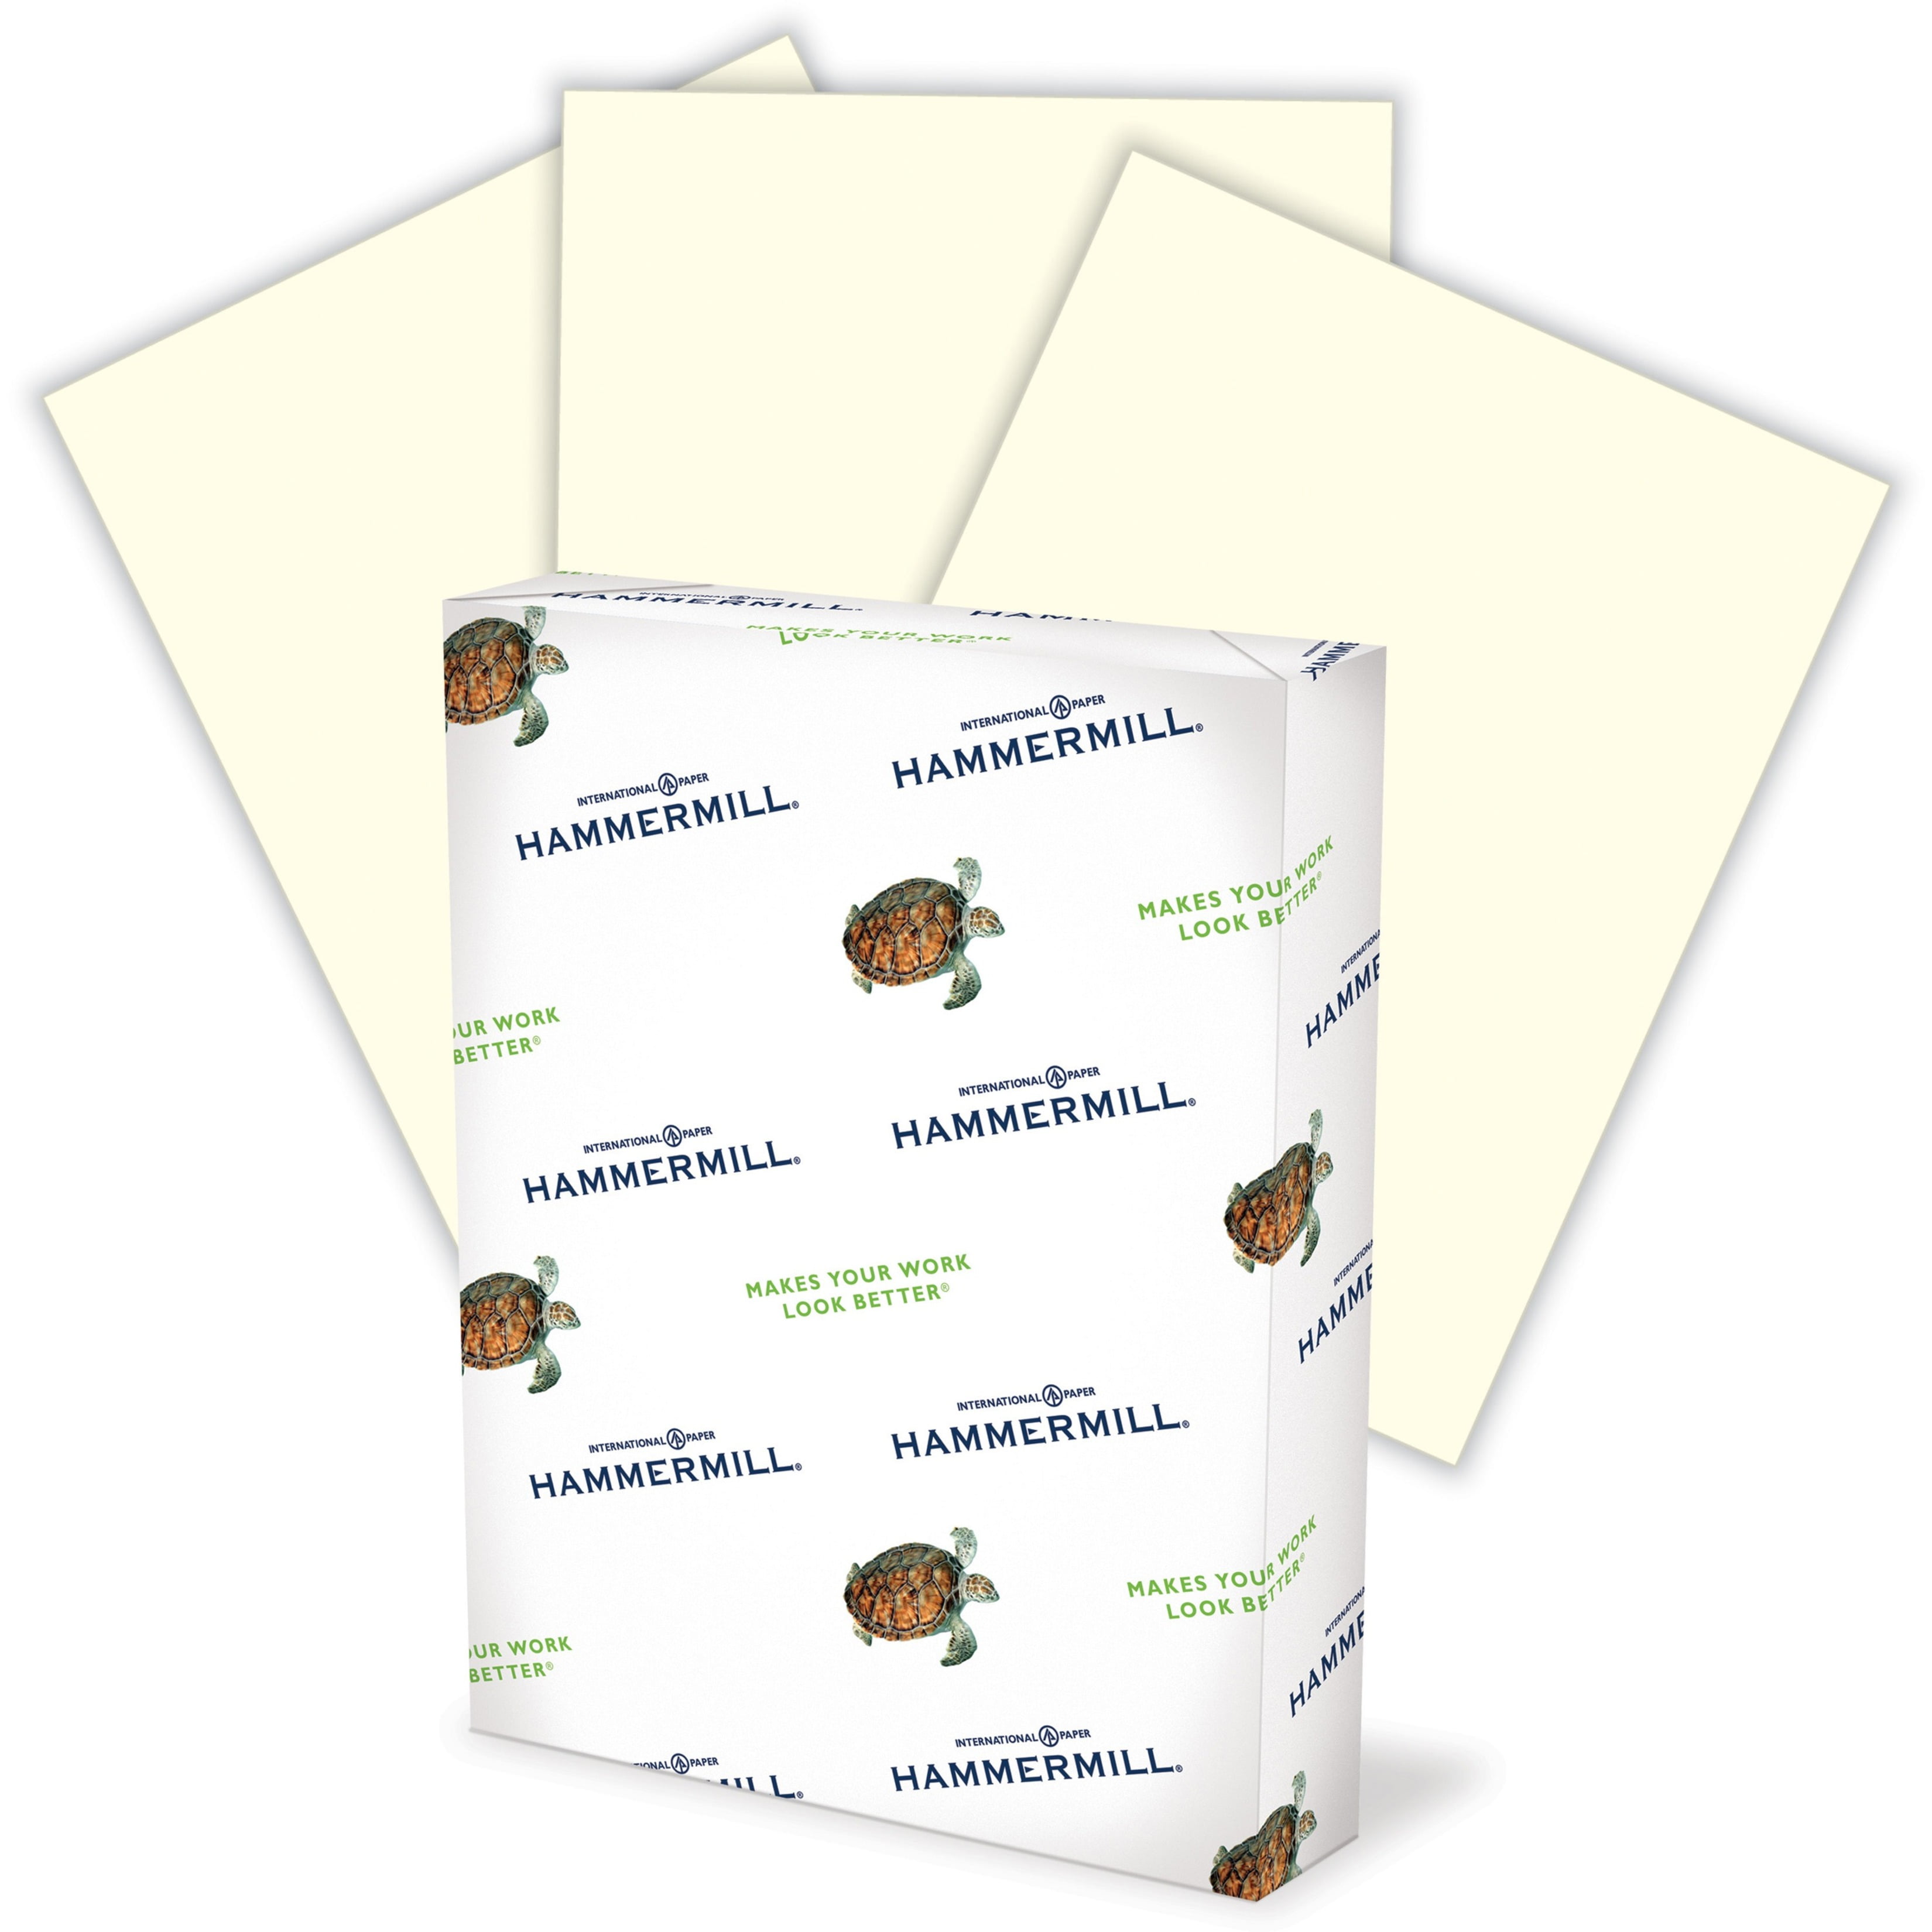 Hammermill Copy Paper, White - 500 count